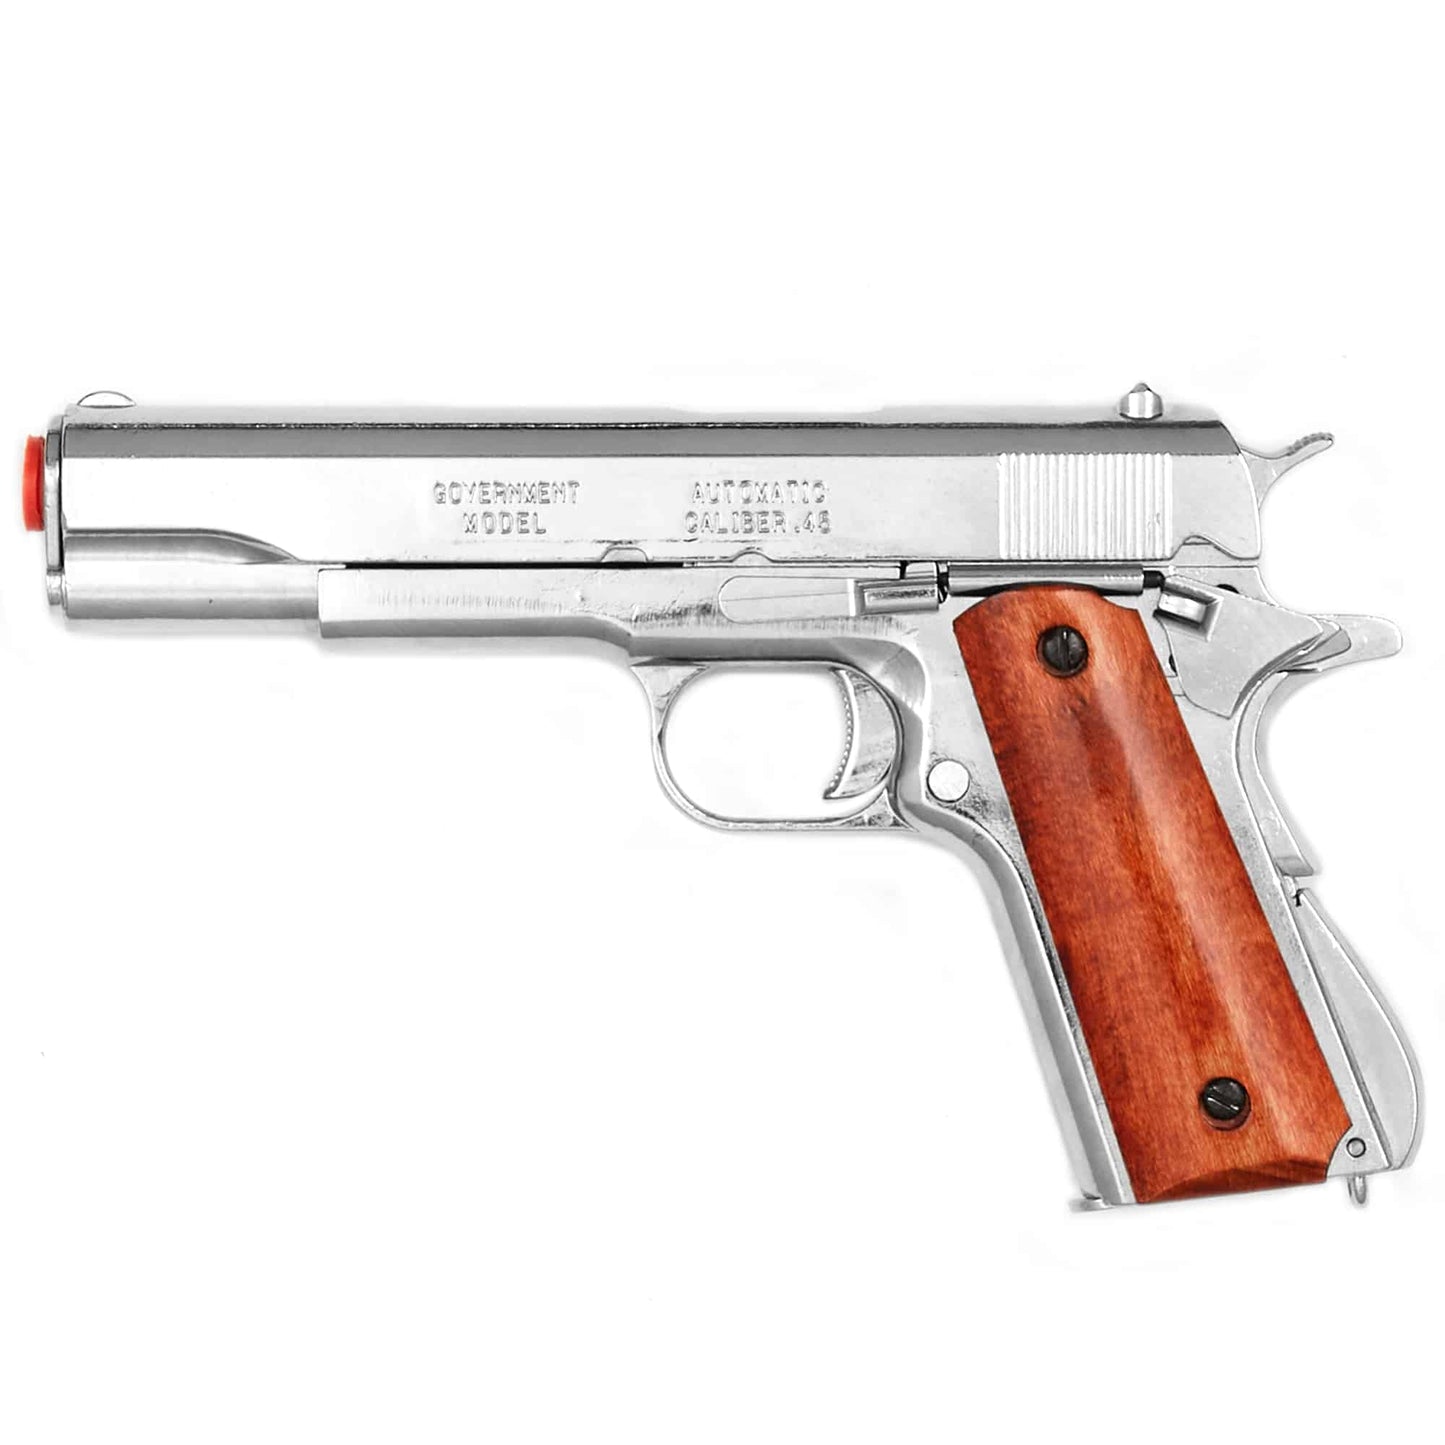 M1911A1 Nickel Finish Wood Gripped Government Automatic Pistol Non-Firing Gun